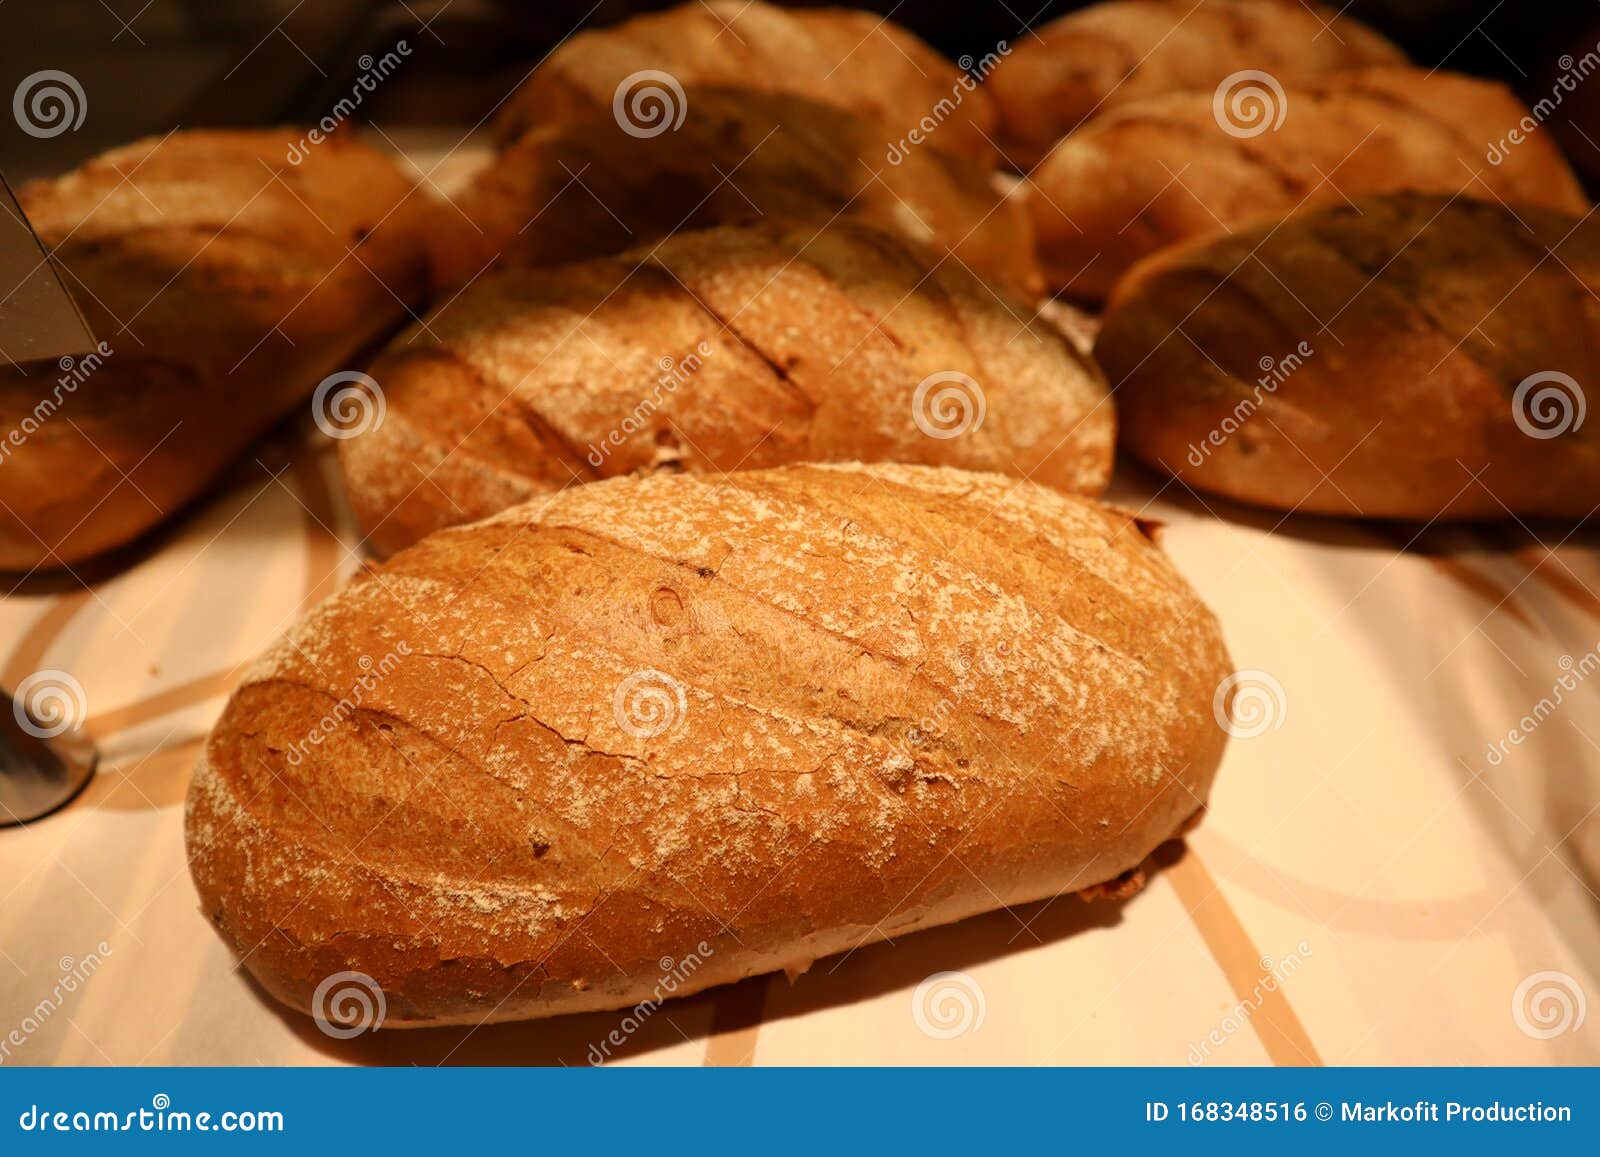 french breads in chinese bakery